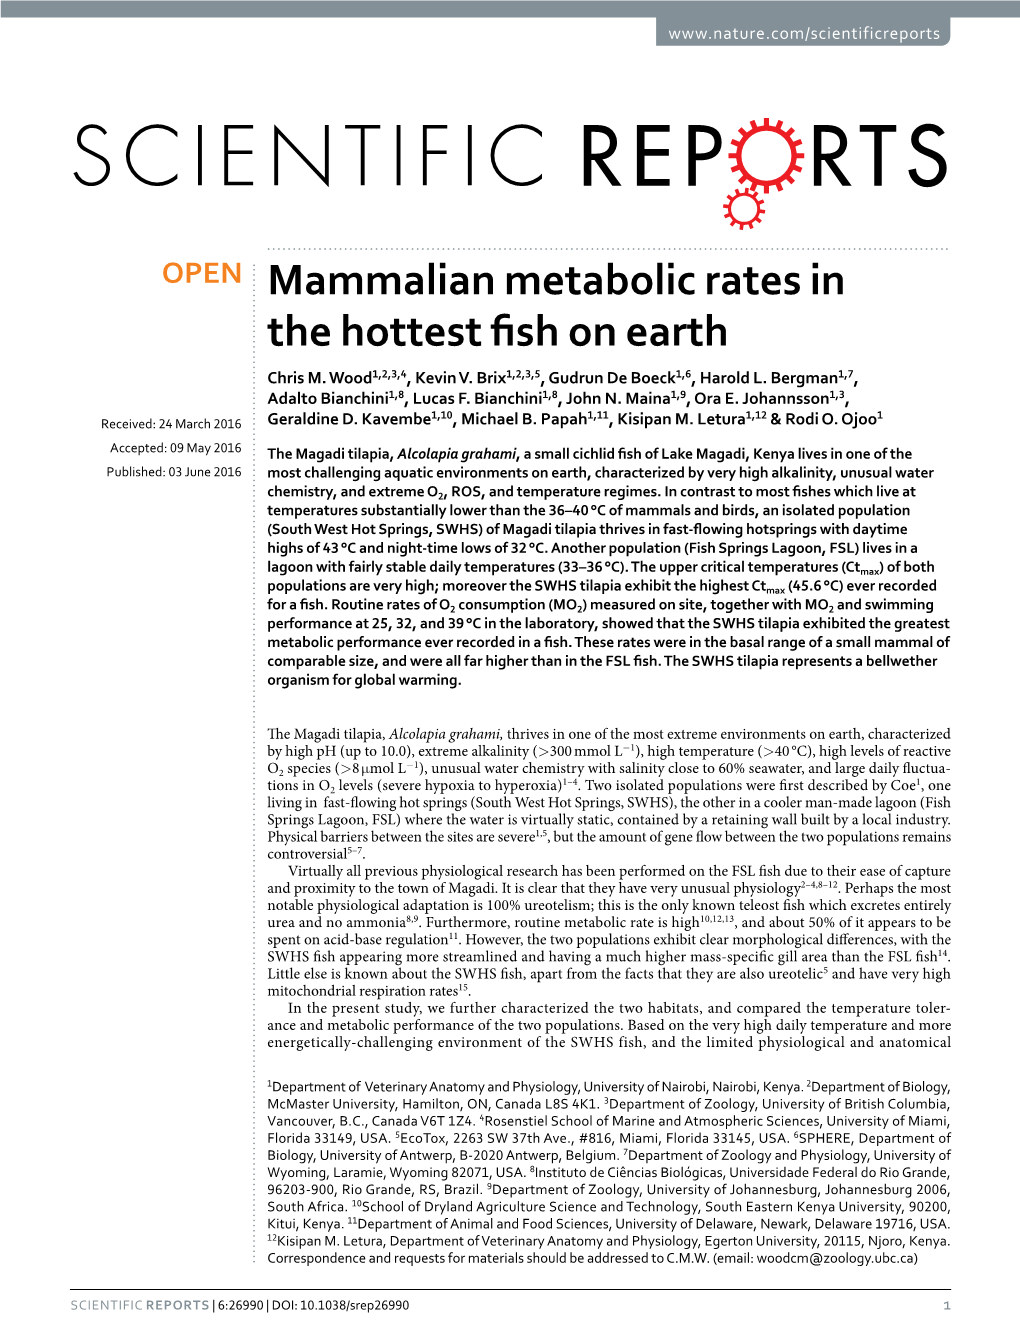 Mammalian Metabolic Rates in the Hottest Fish on Earth Chris M